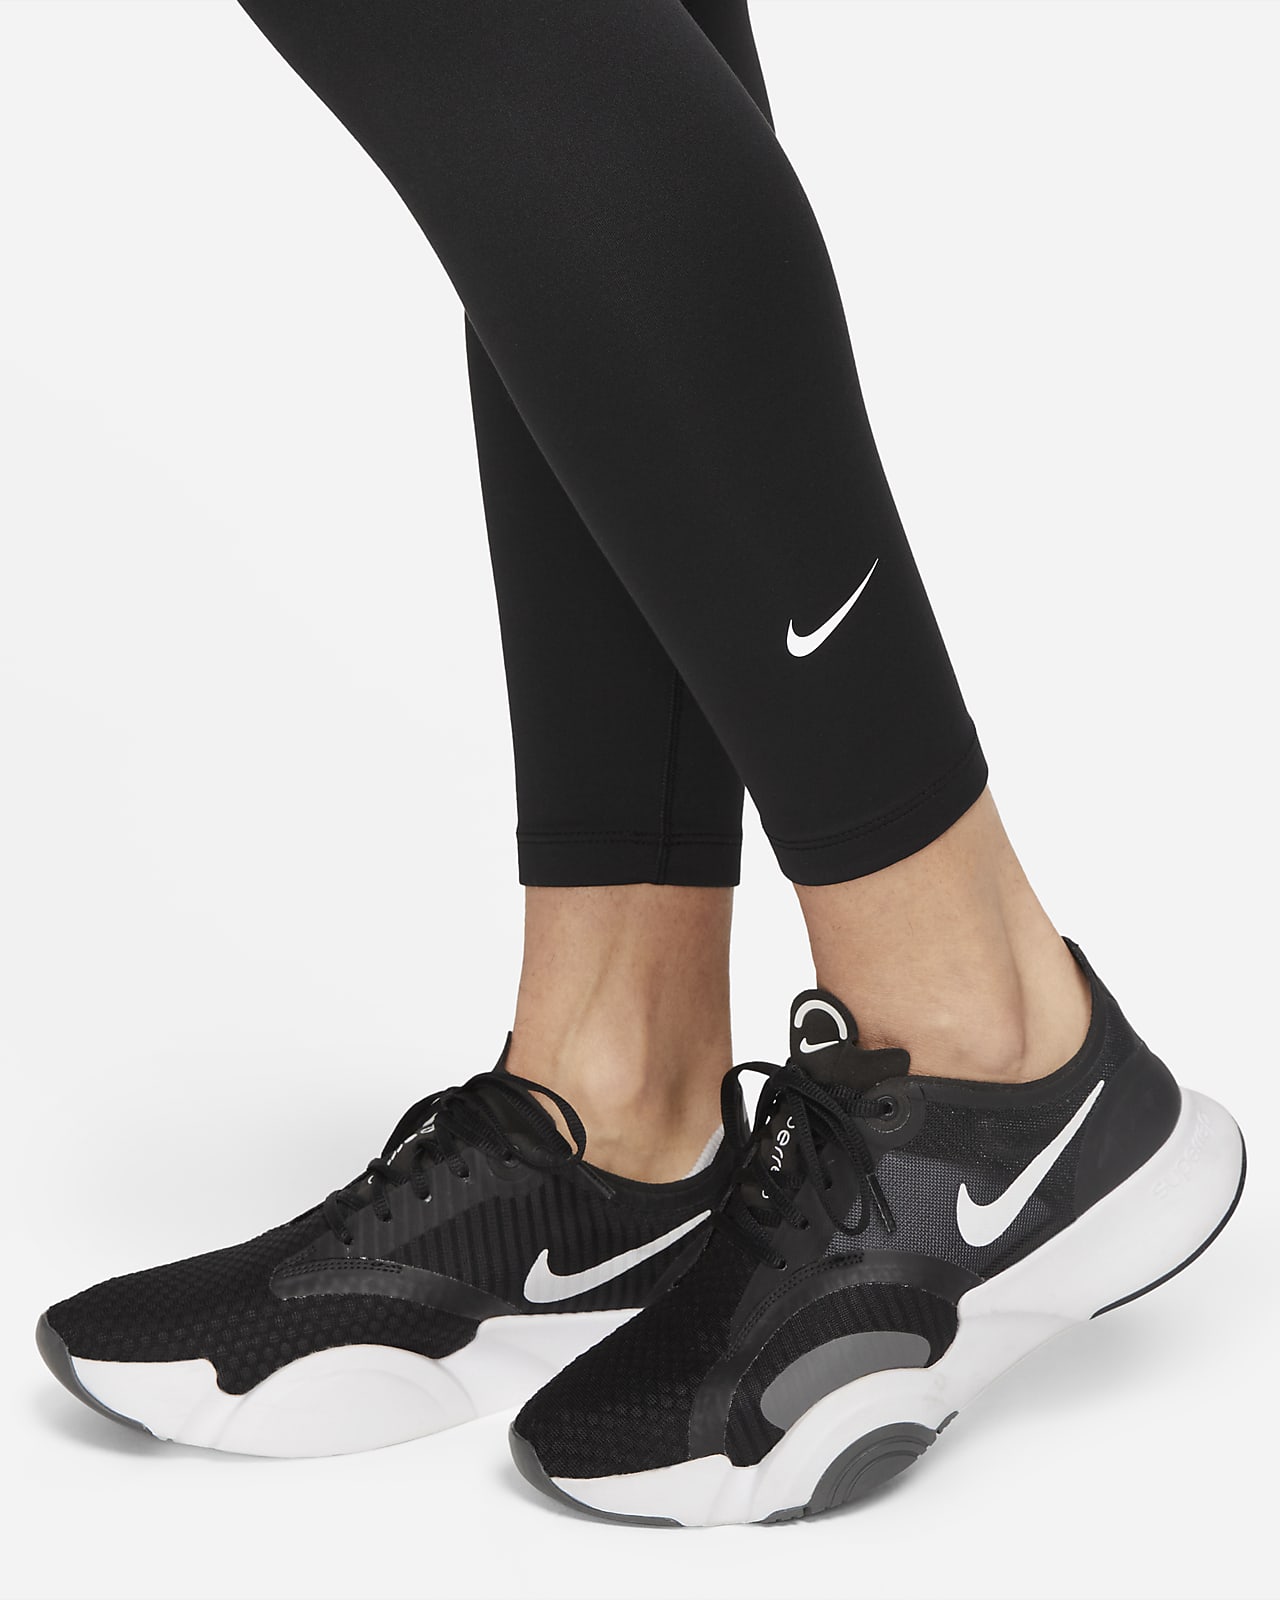 Nike Therma-FIT 7/8 One Leggings. High-Waisted Women\'s